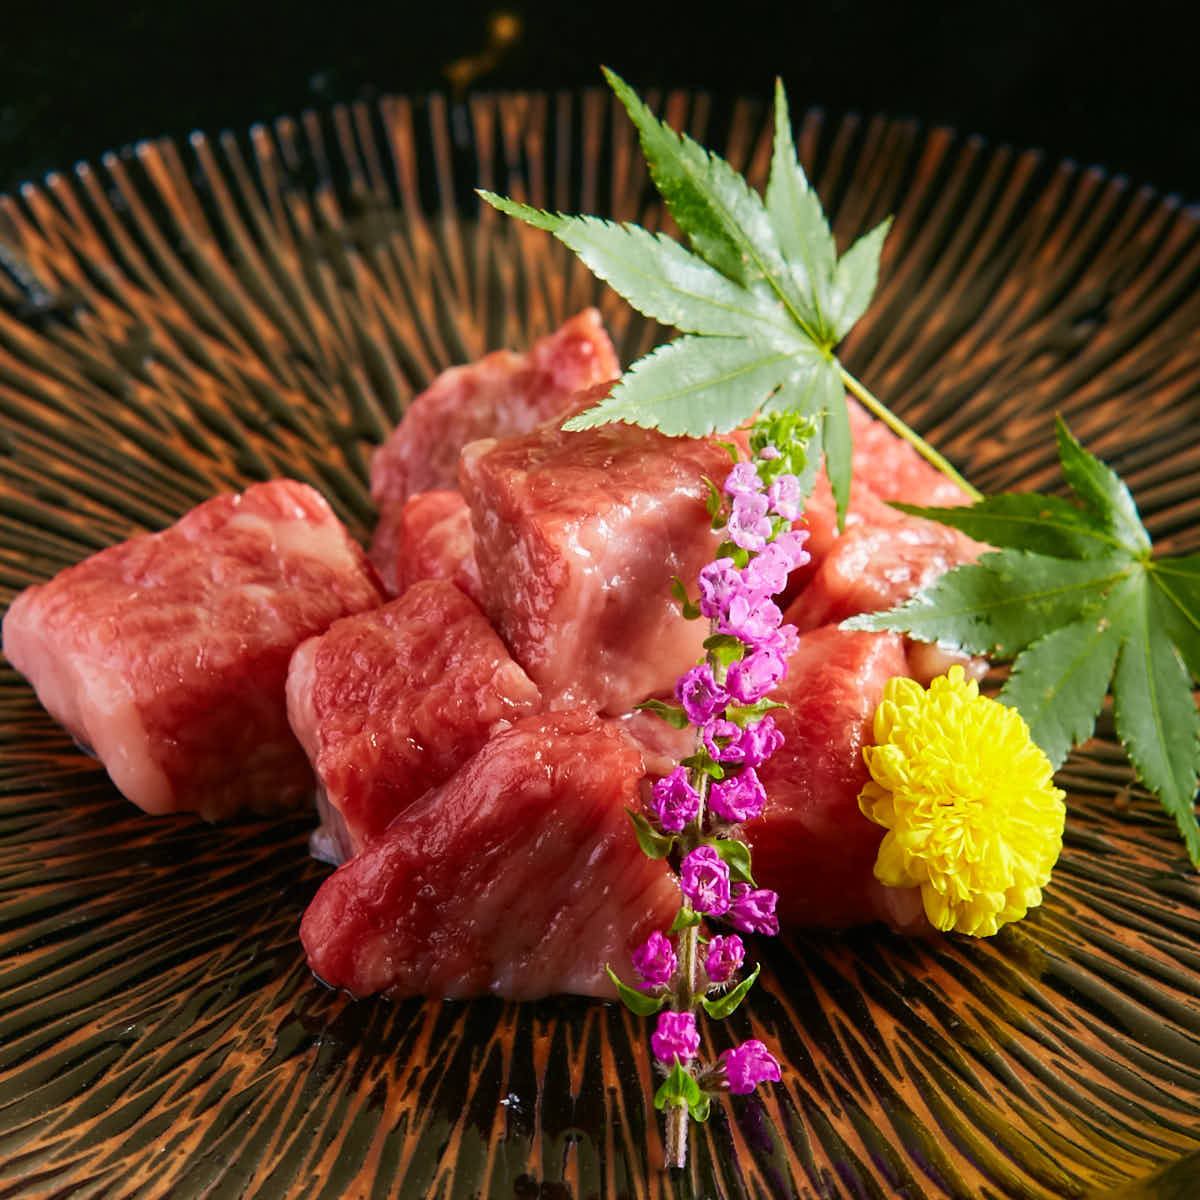 We prepare dishes with delicious meat. There are many excellent dishes.